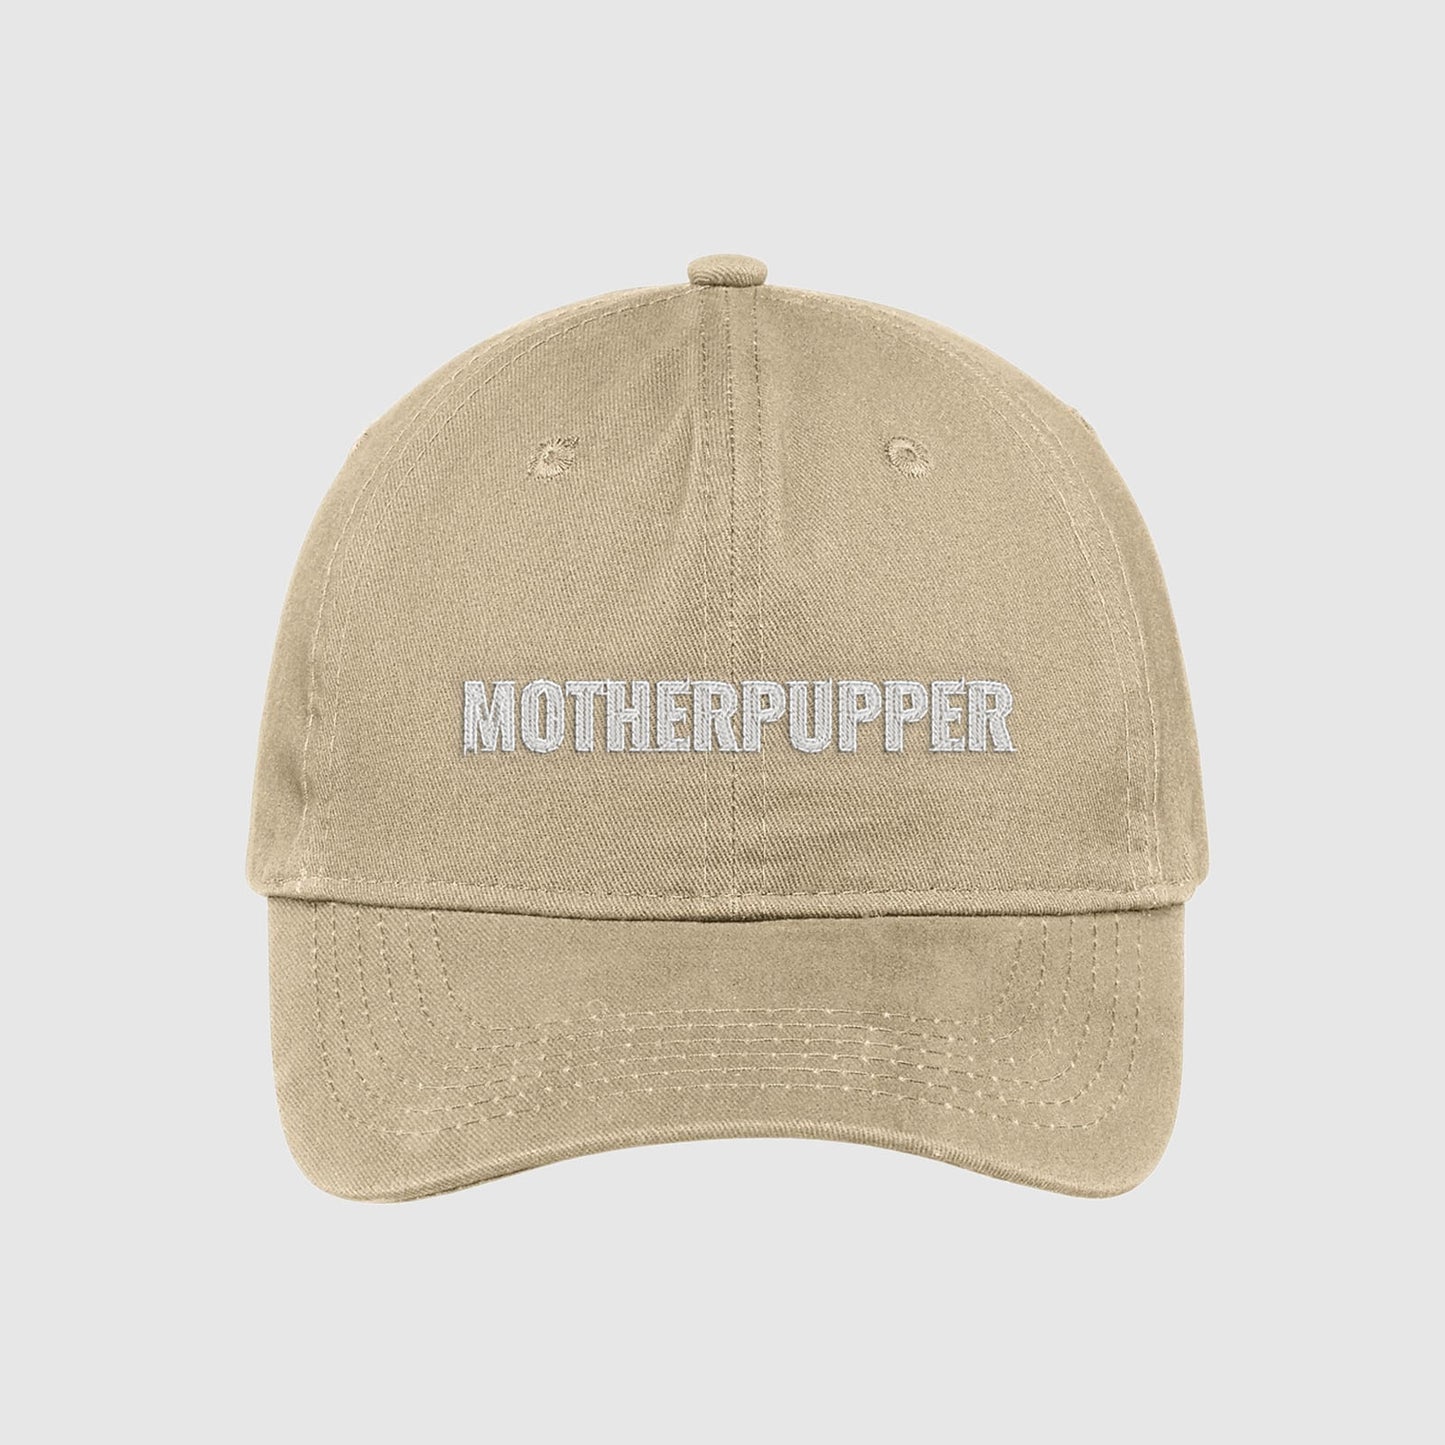 Tan Mother Pupper dad Hat for dog moms embroidered with white text.